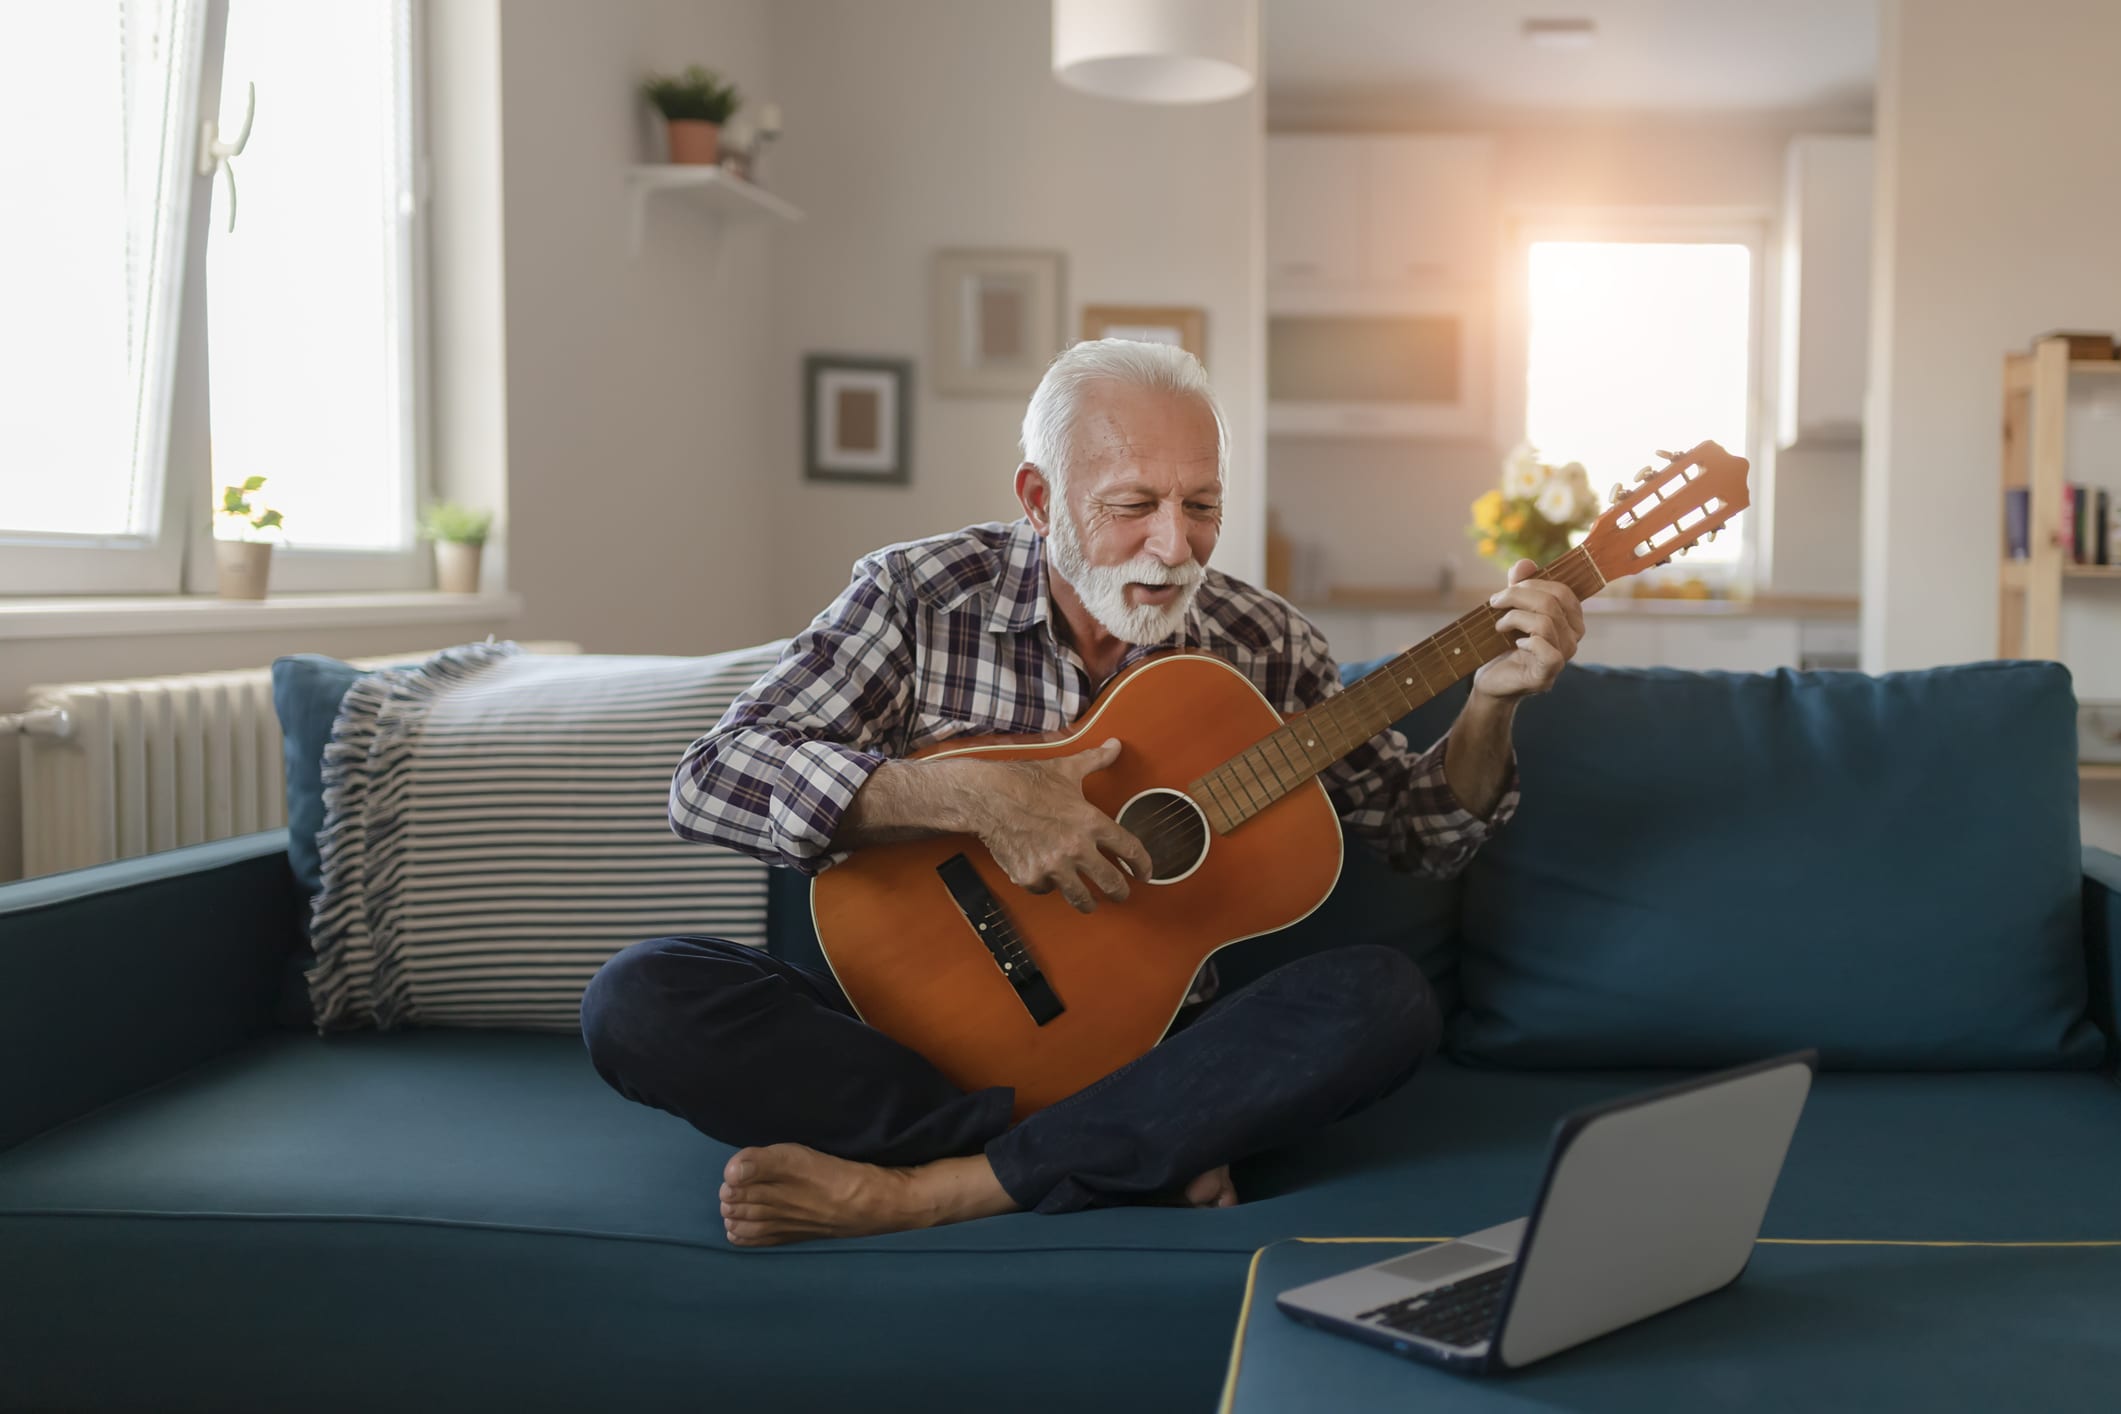 Happy good looking elderly man in a plaid shirt sits on a sofa in the living room and learns to play acoustic guitar online using a Laptop